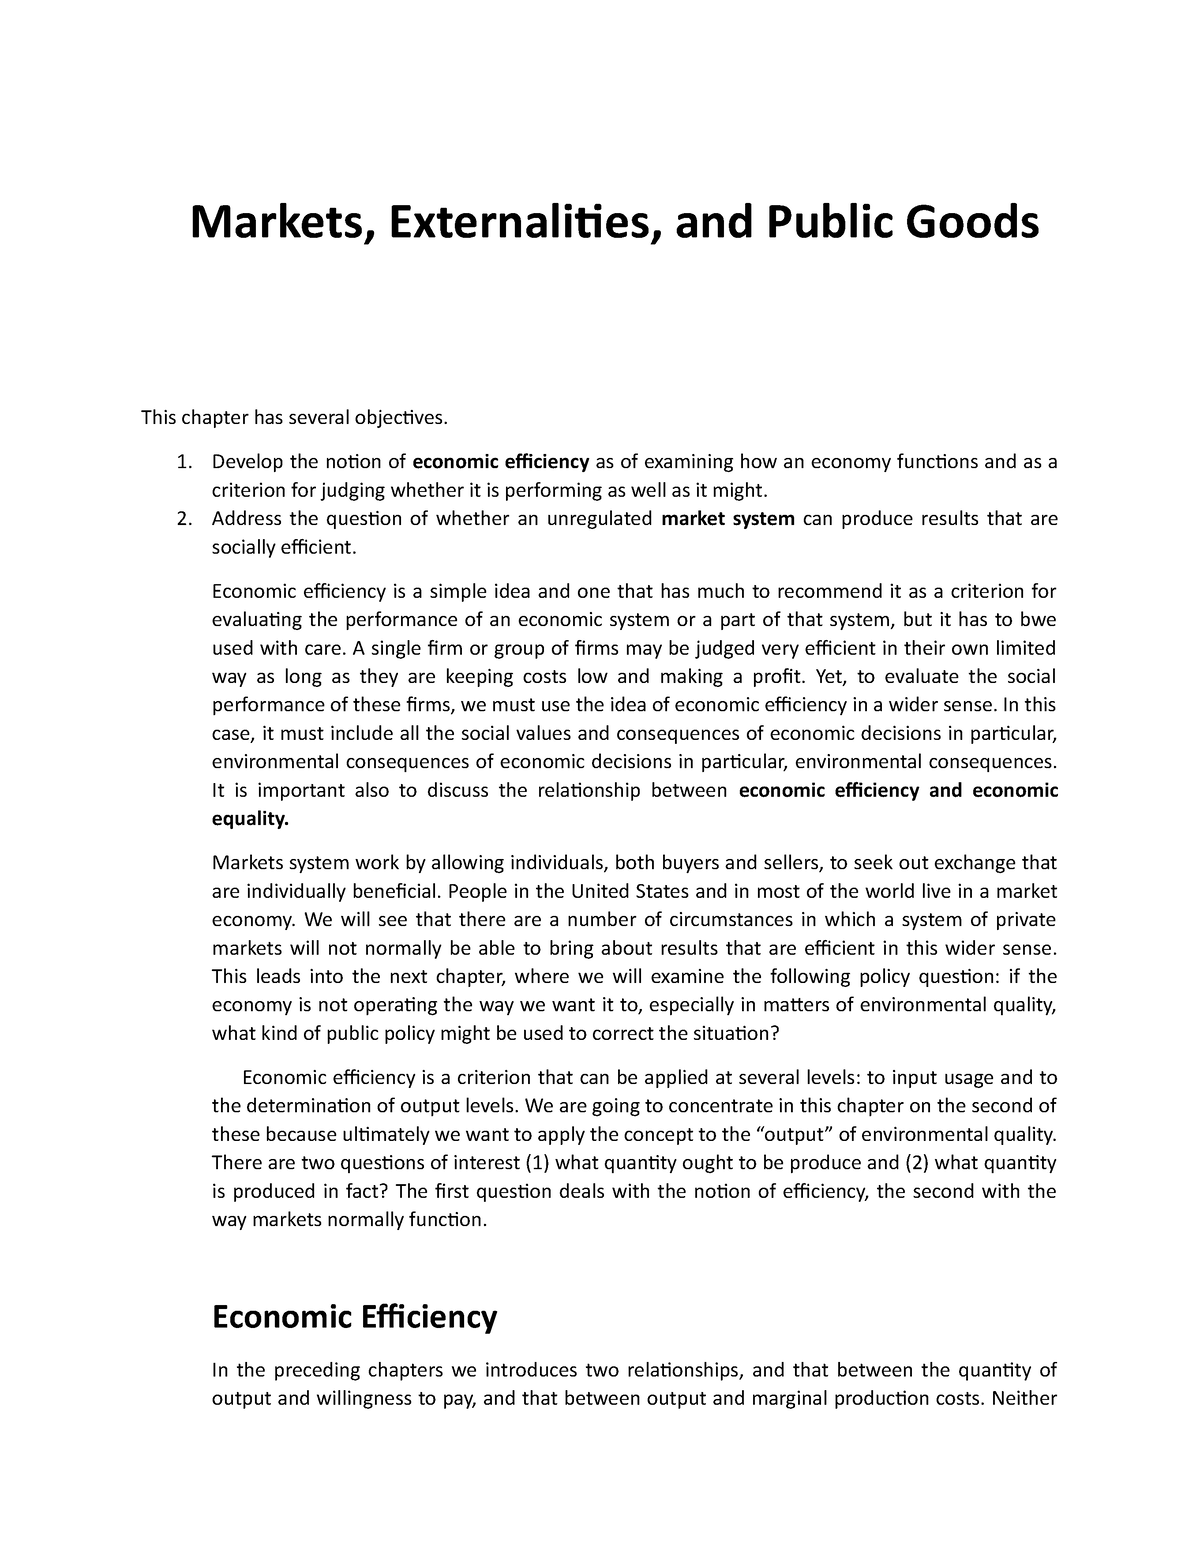 research paper on market externalities